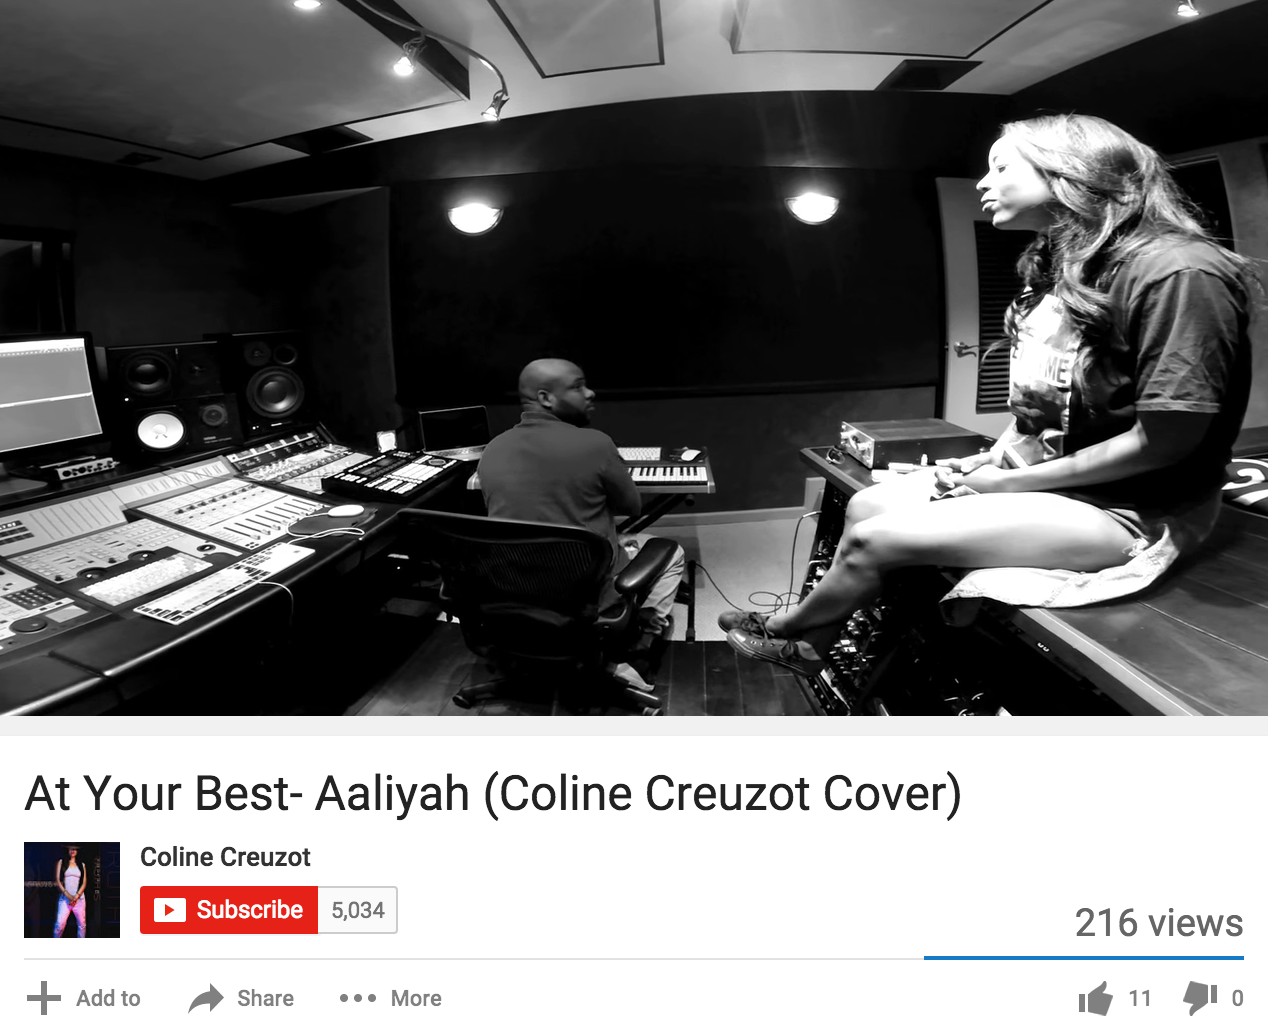 To view Coline Creuzot's acoustic cover of Aaliyah's "At Your Best," please visit her YouTube channel.